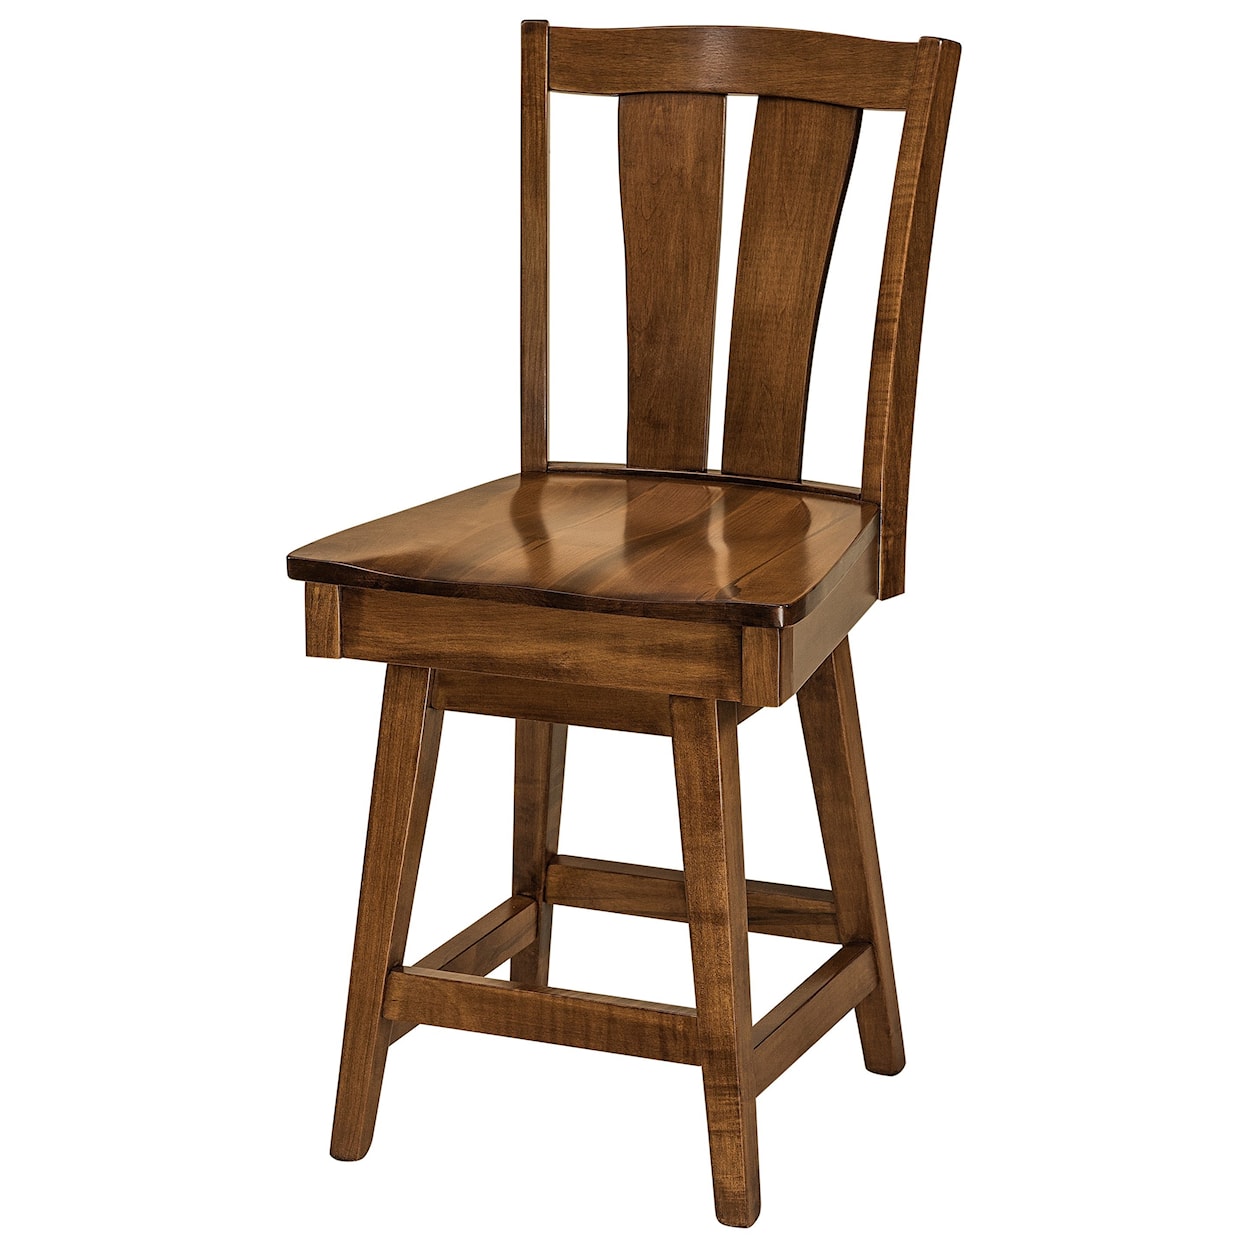 F&N Woodworking Brawley Swivel Counter Height Stool - Leather Seat